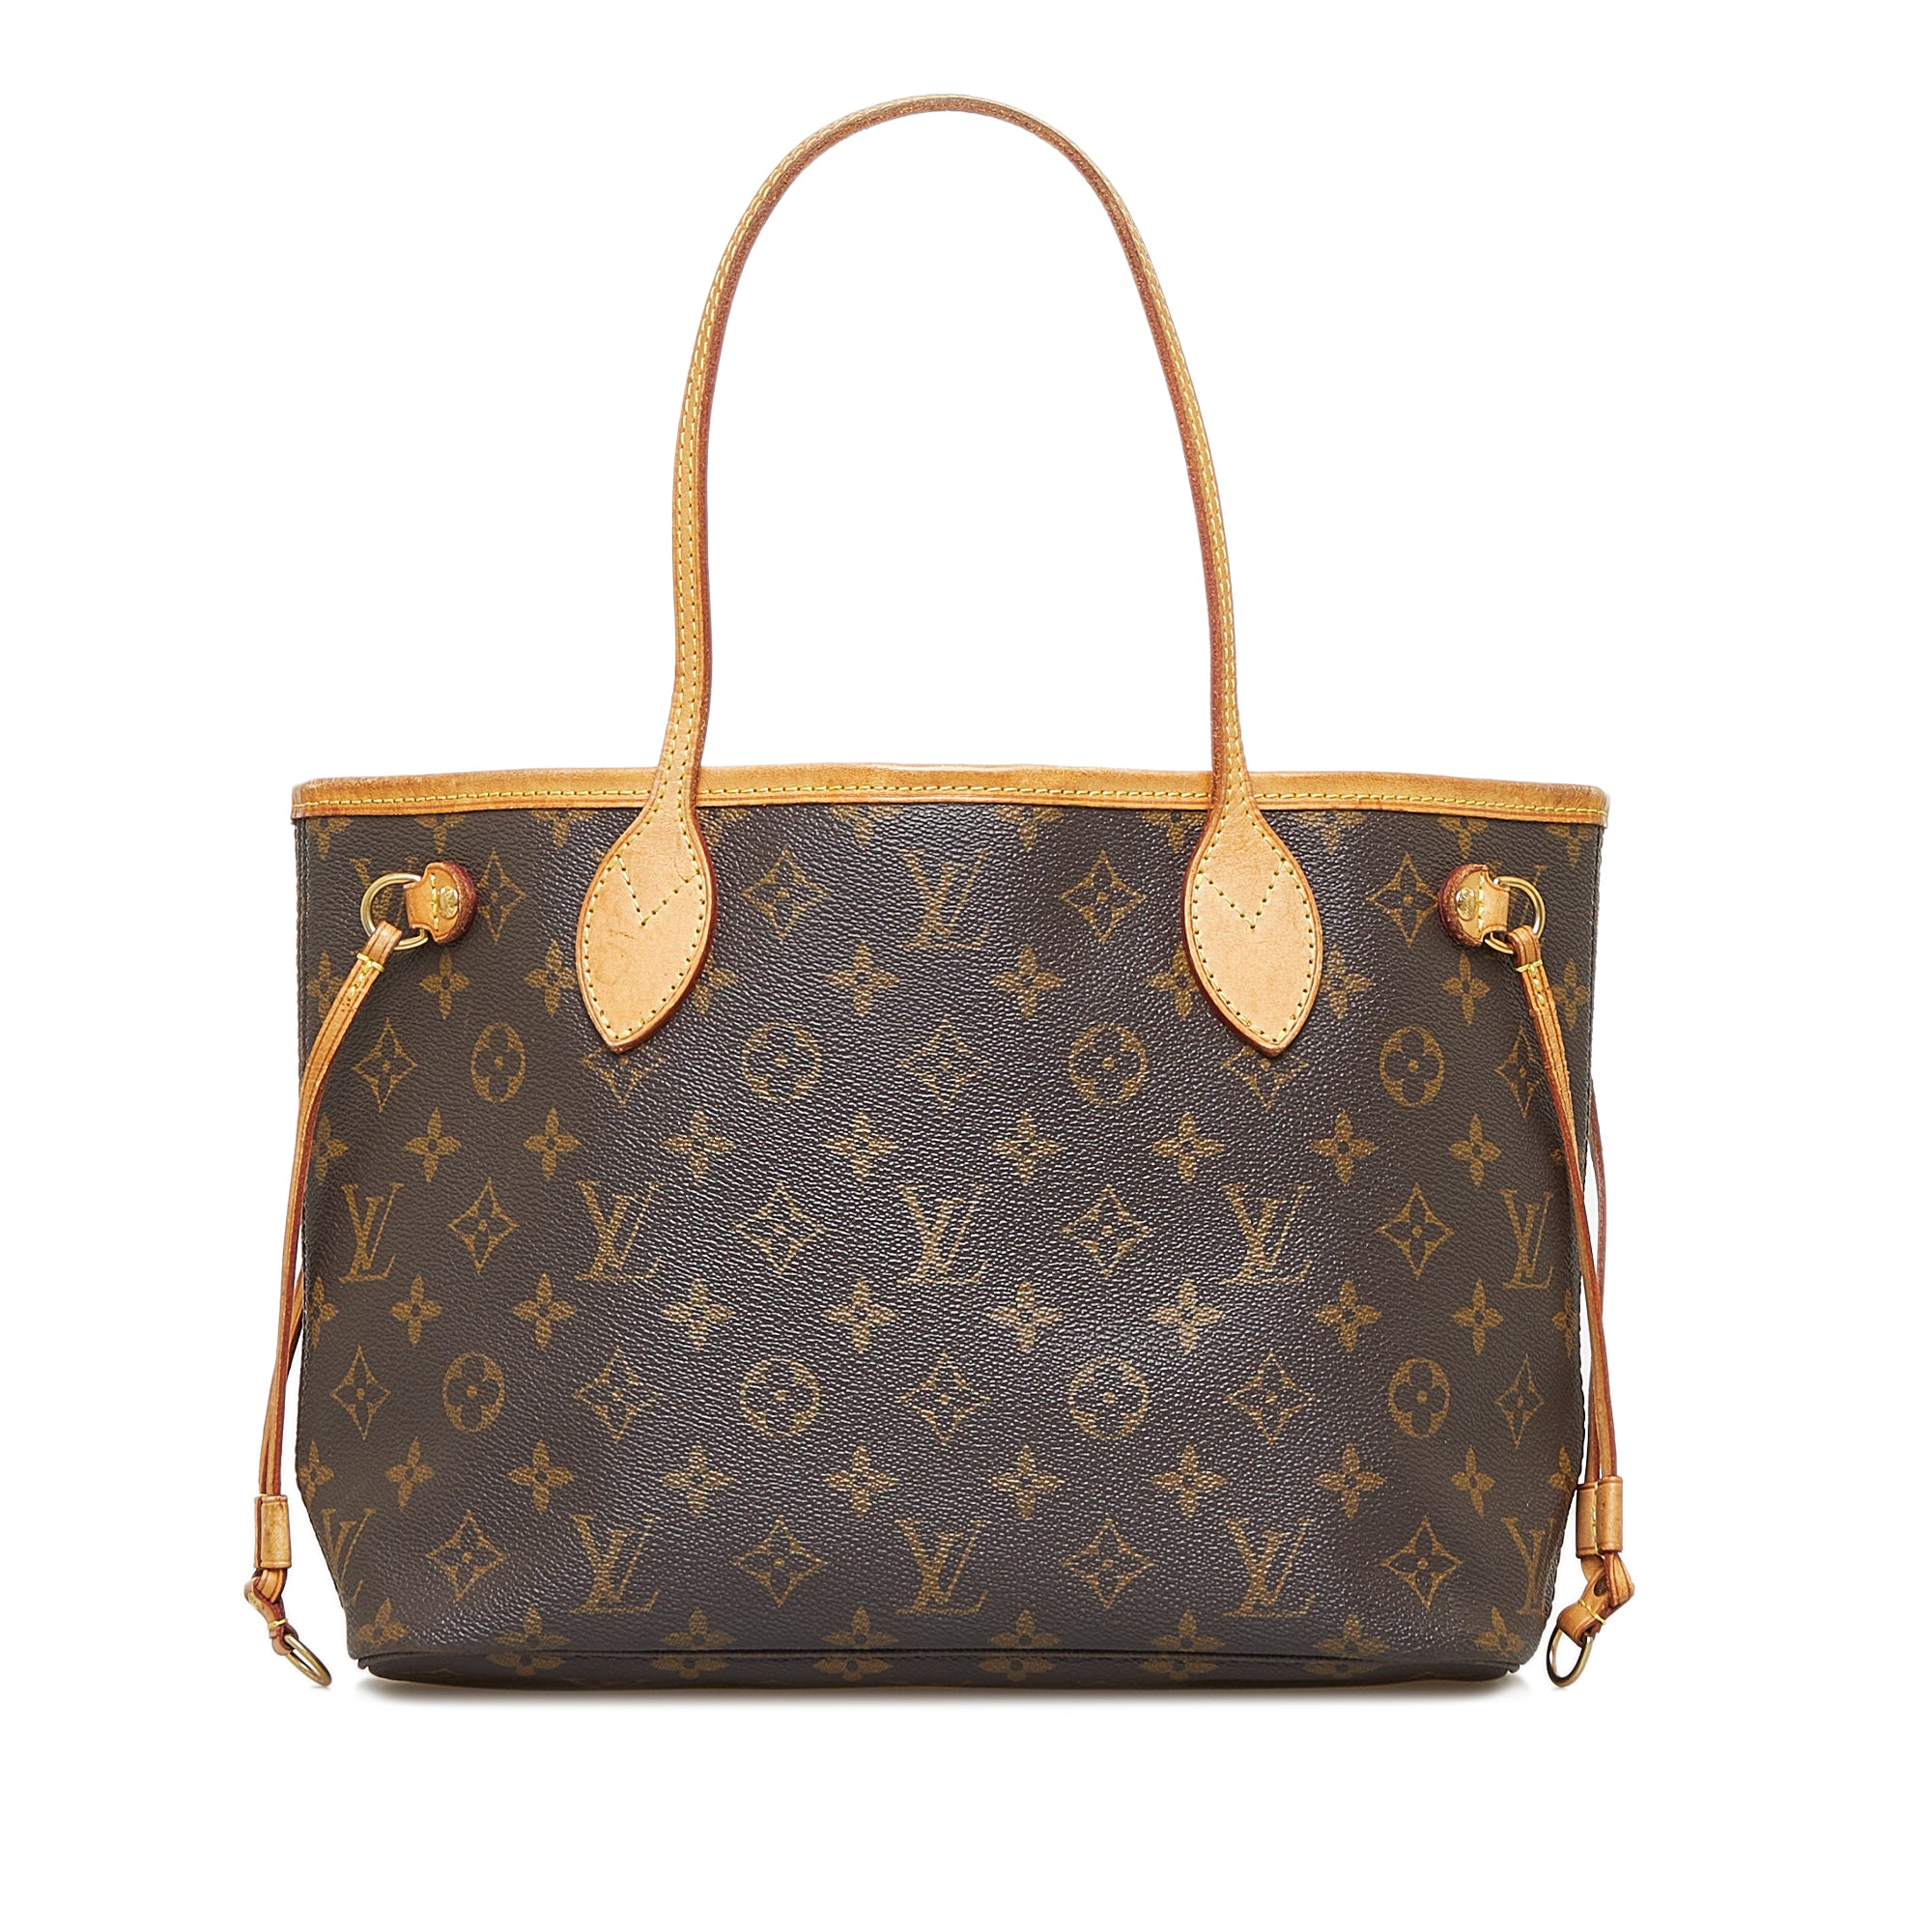 Louis+Vuitton+Neverfull+Beige+Interior+Tote+PM+Brown+Canvas for